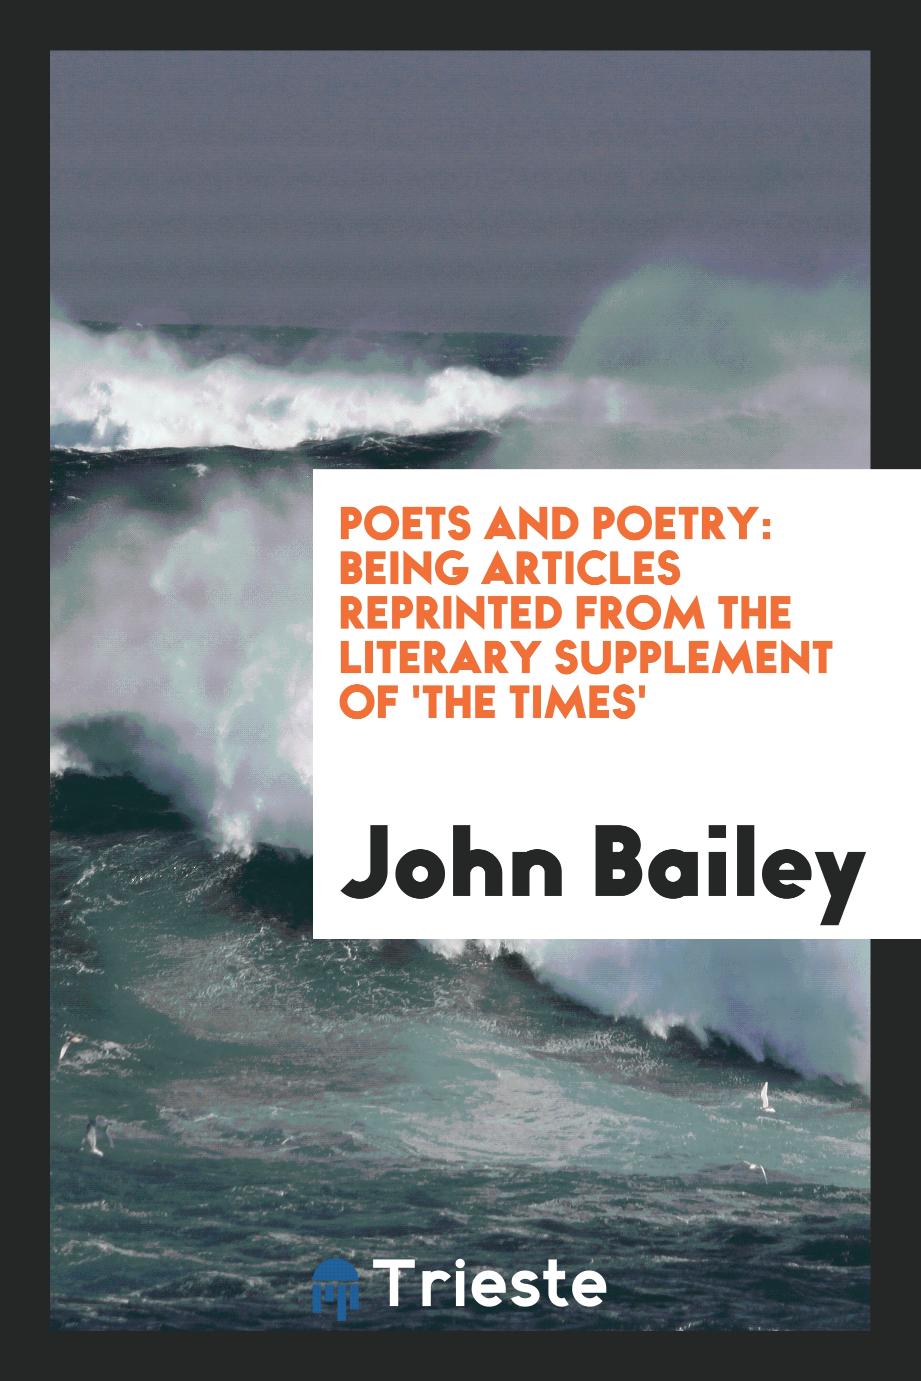 Poets and Poetry: Being Articles Reprinted from the Literary Supplement of 'The Times'